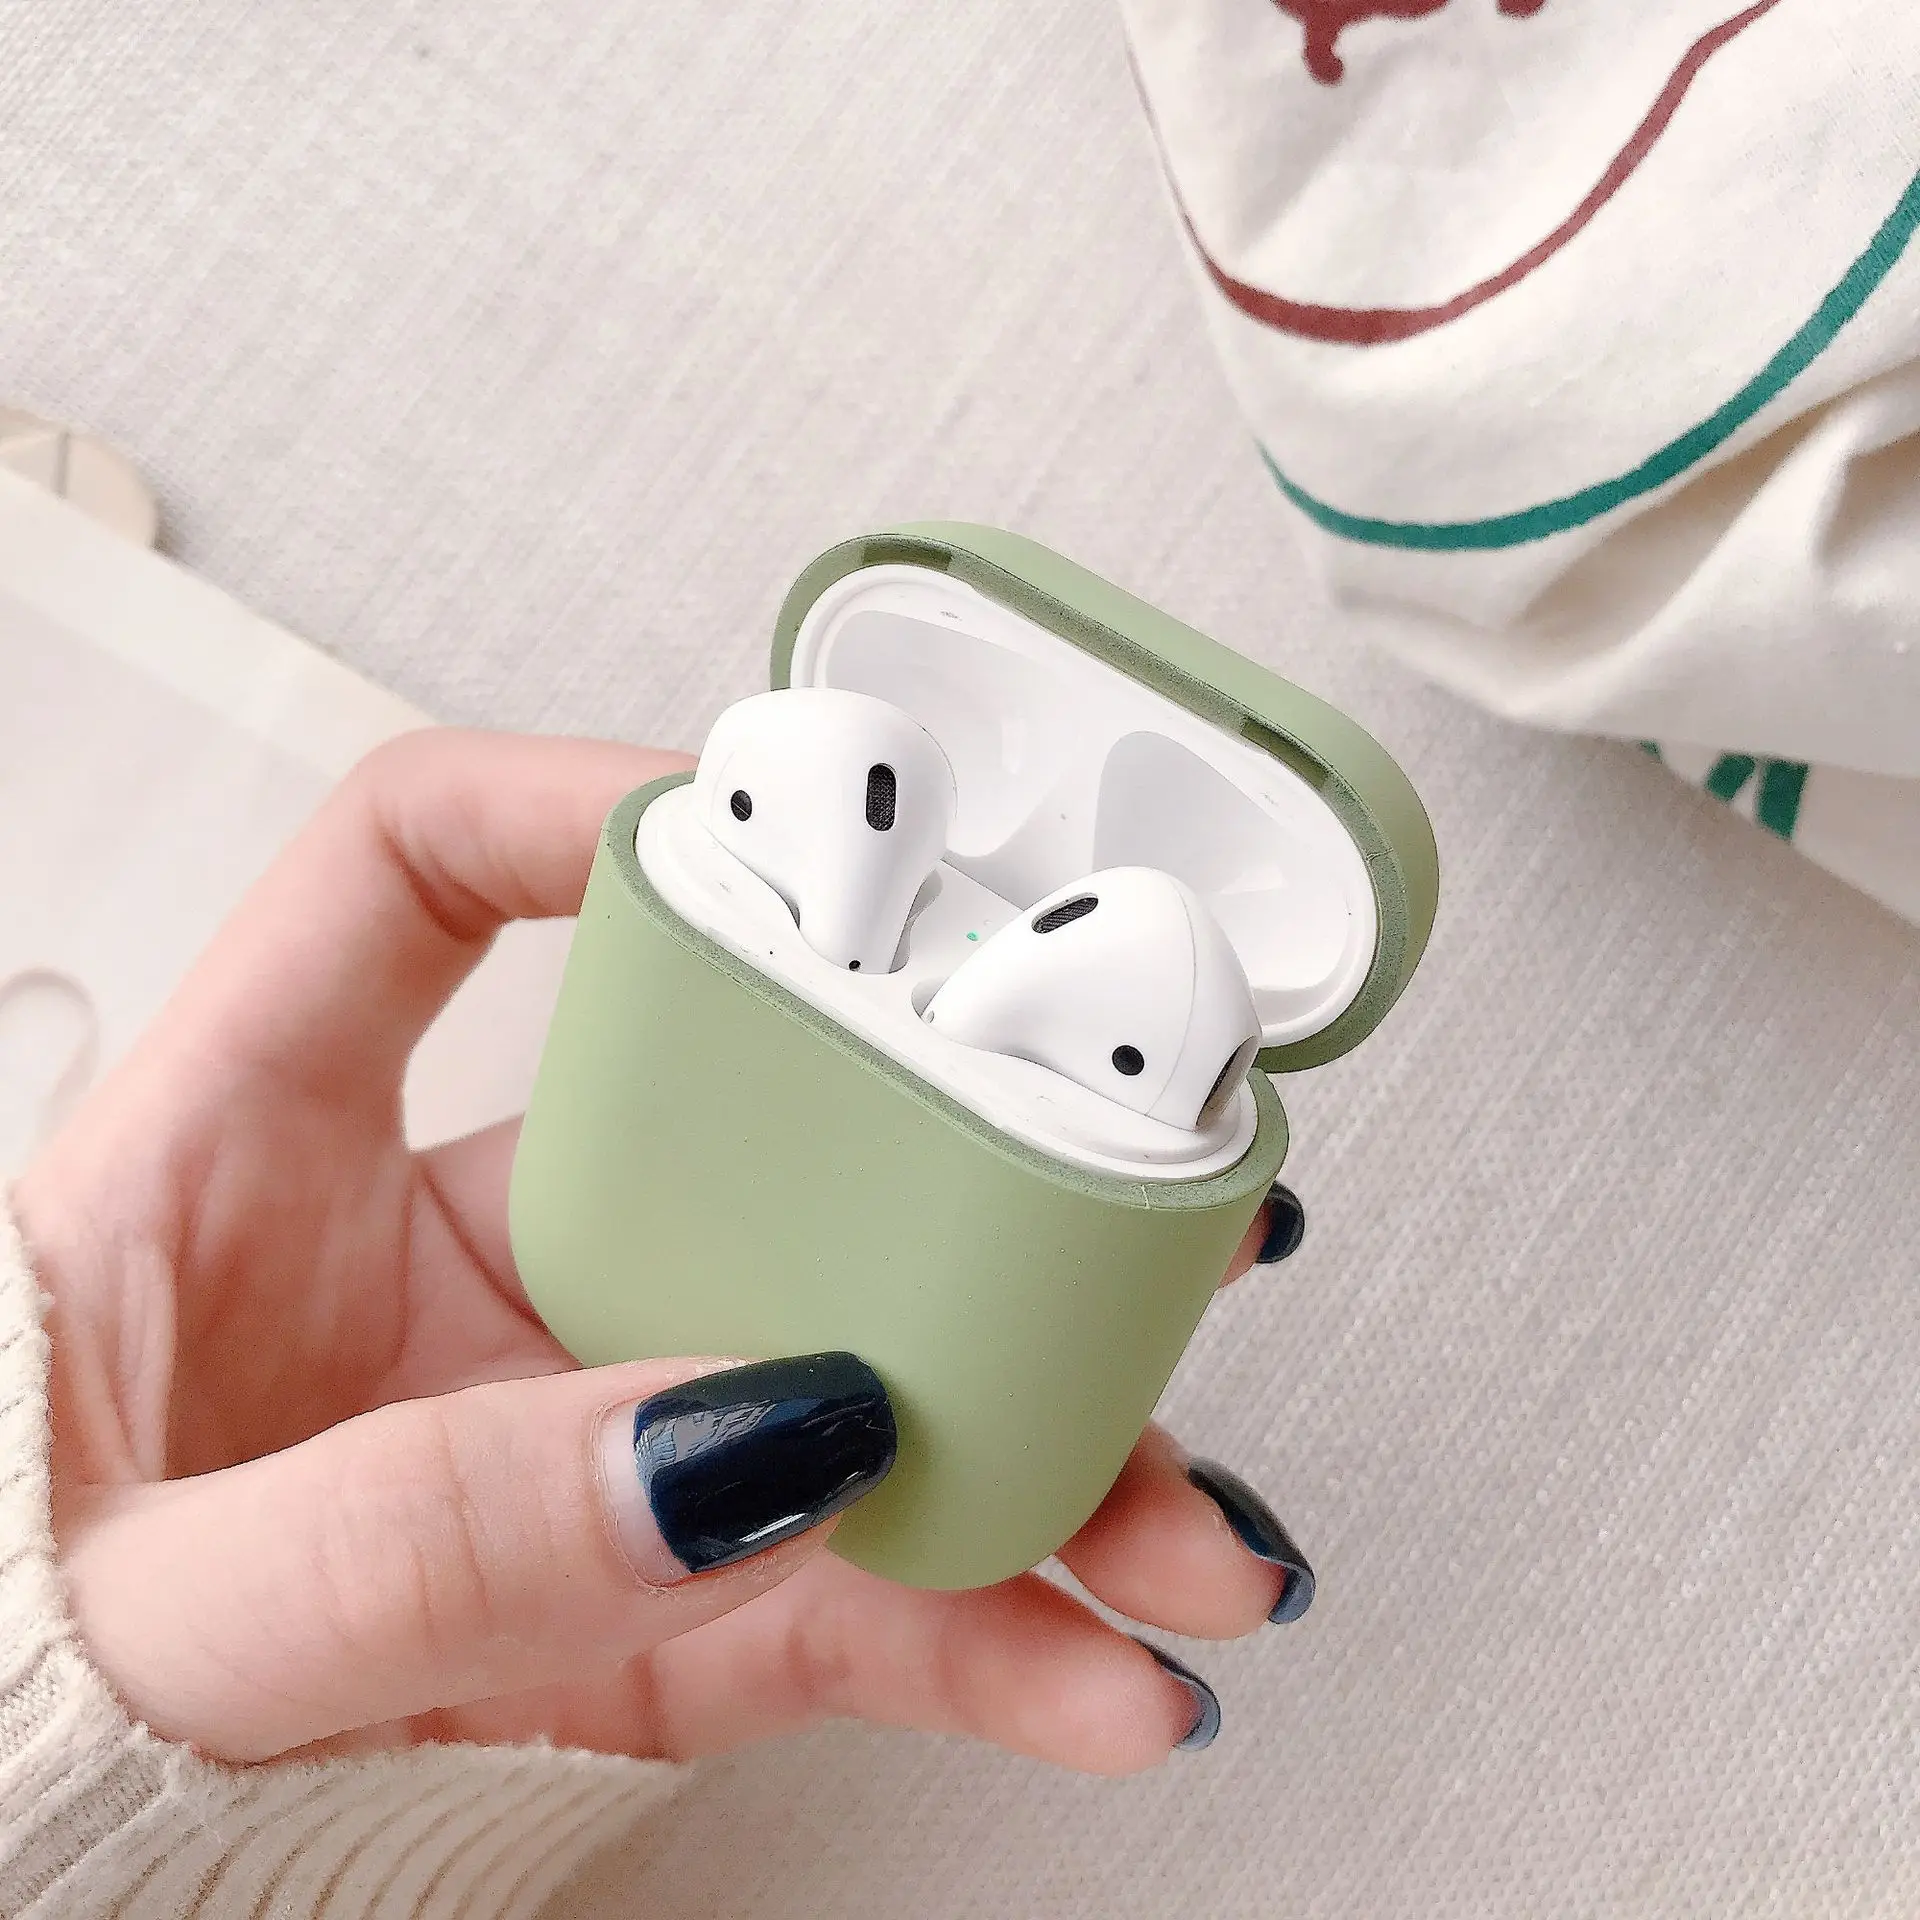 Soft Silicone Cases For Apple Airpods Pro 1/2 Protective Bluetooth Wireless Earphone Cover For Apple Air Pods Charging Box Bags enlarge